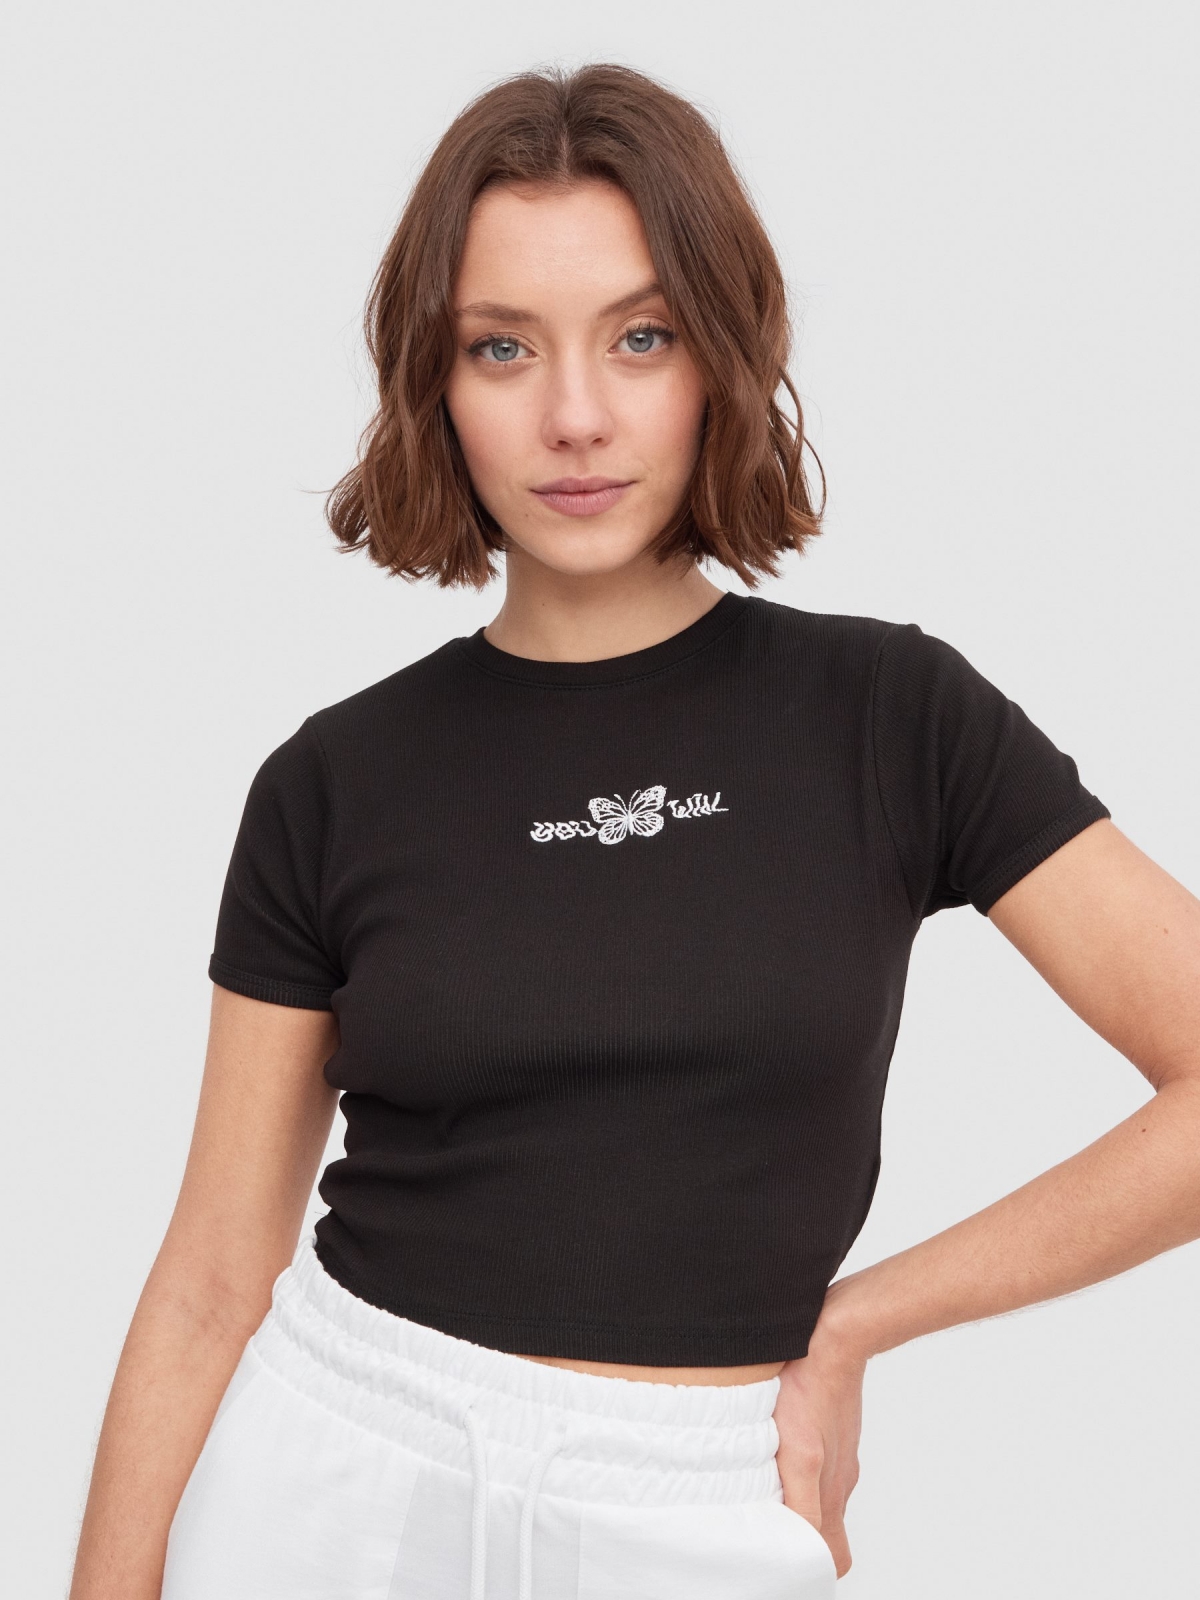 Rib butterfly embroidered T-shirt black middle front view